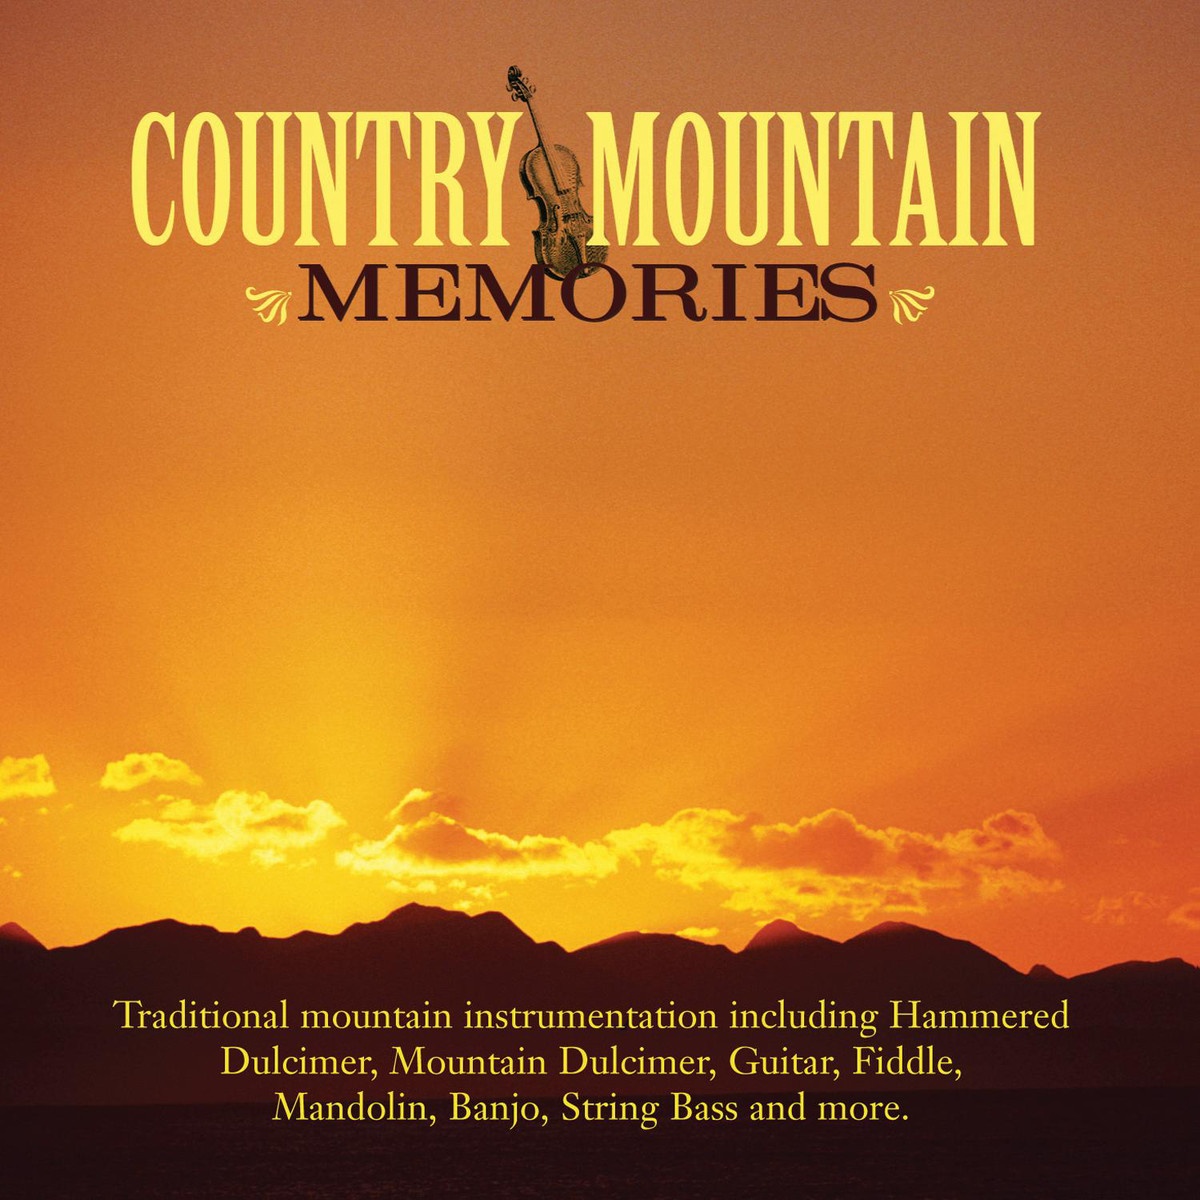 I'll Fly Away (Country Mountain Memories album version)